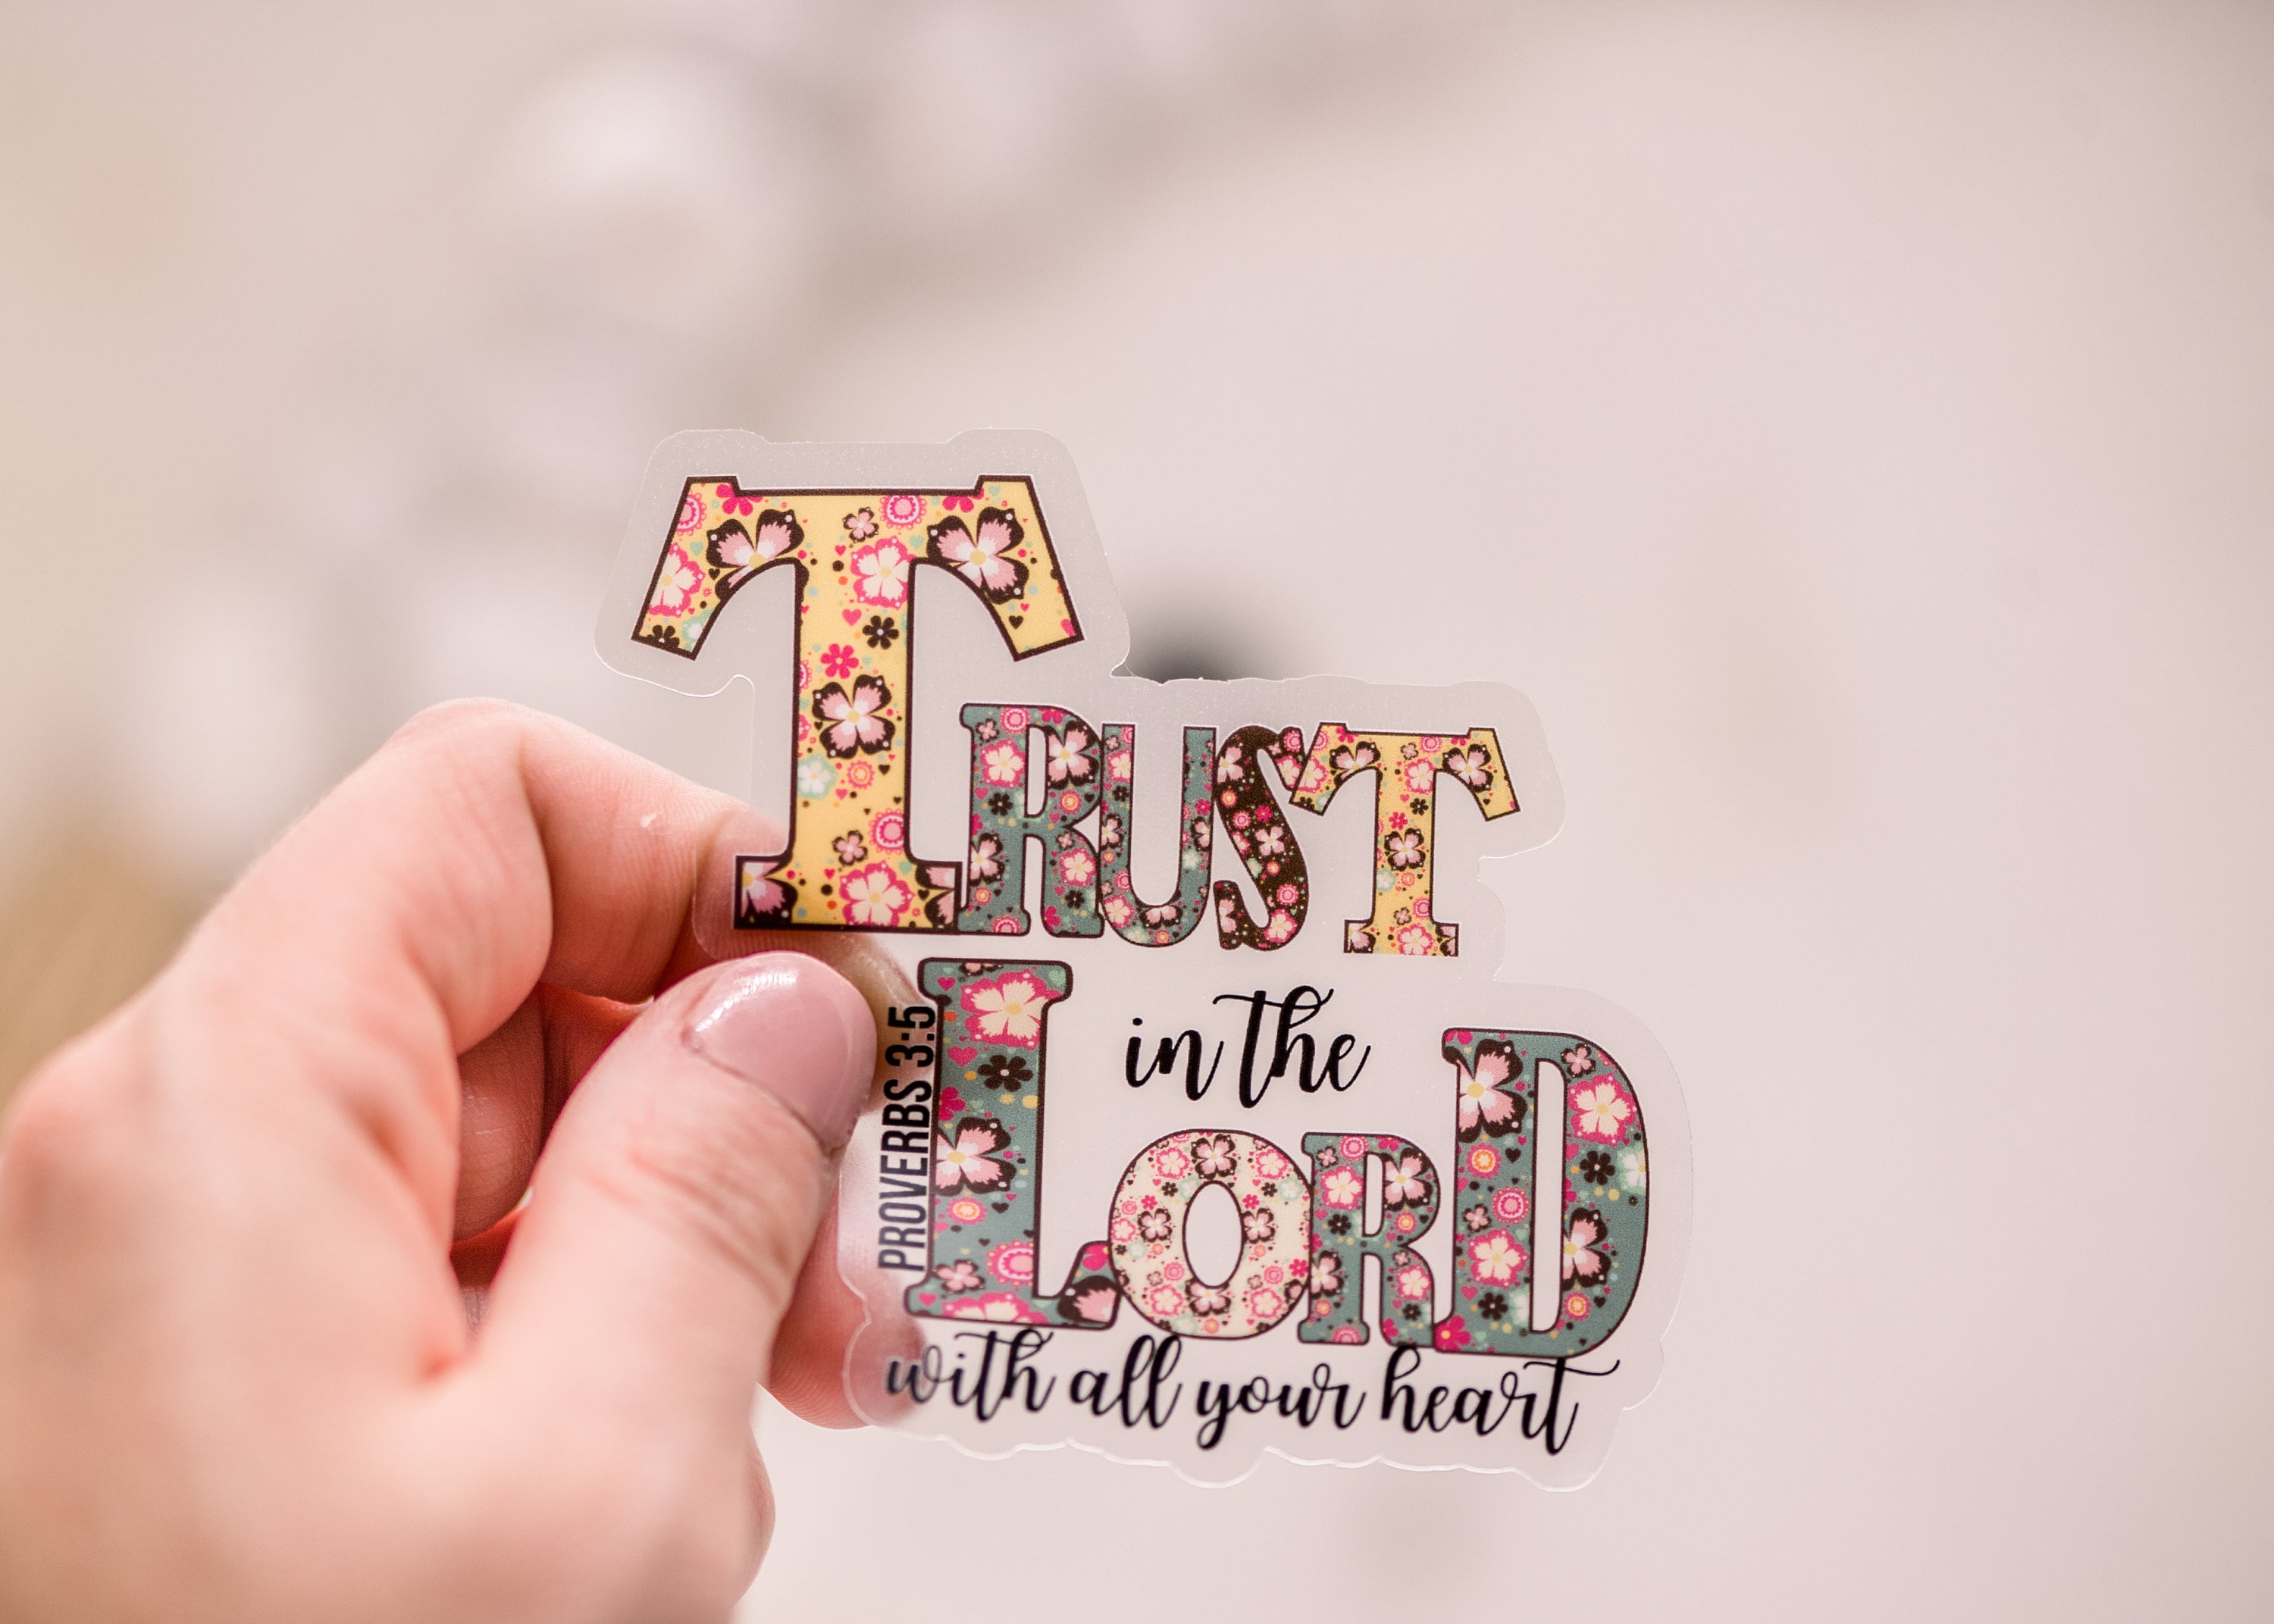 Trust in the Lord Sticker, Mirror Decal Affirmation, Bible Verse Sticker,  Religious, Positive Sticker Quotes, Christian Stickers for Women 